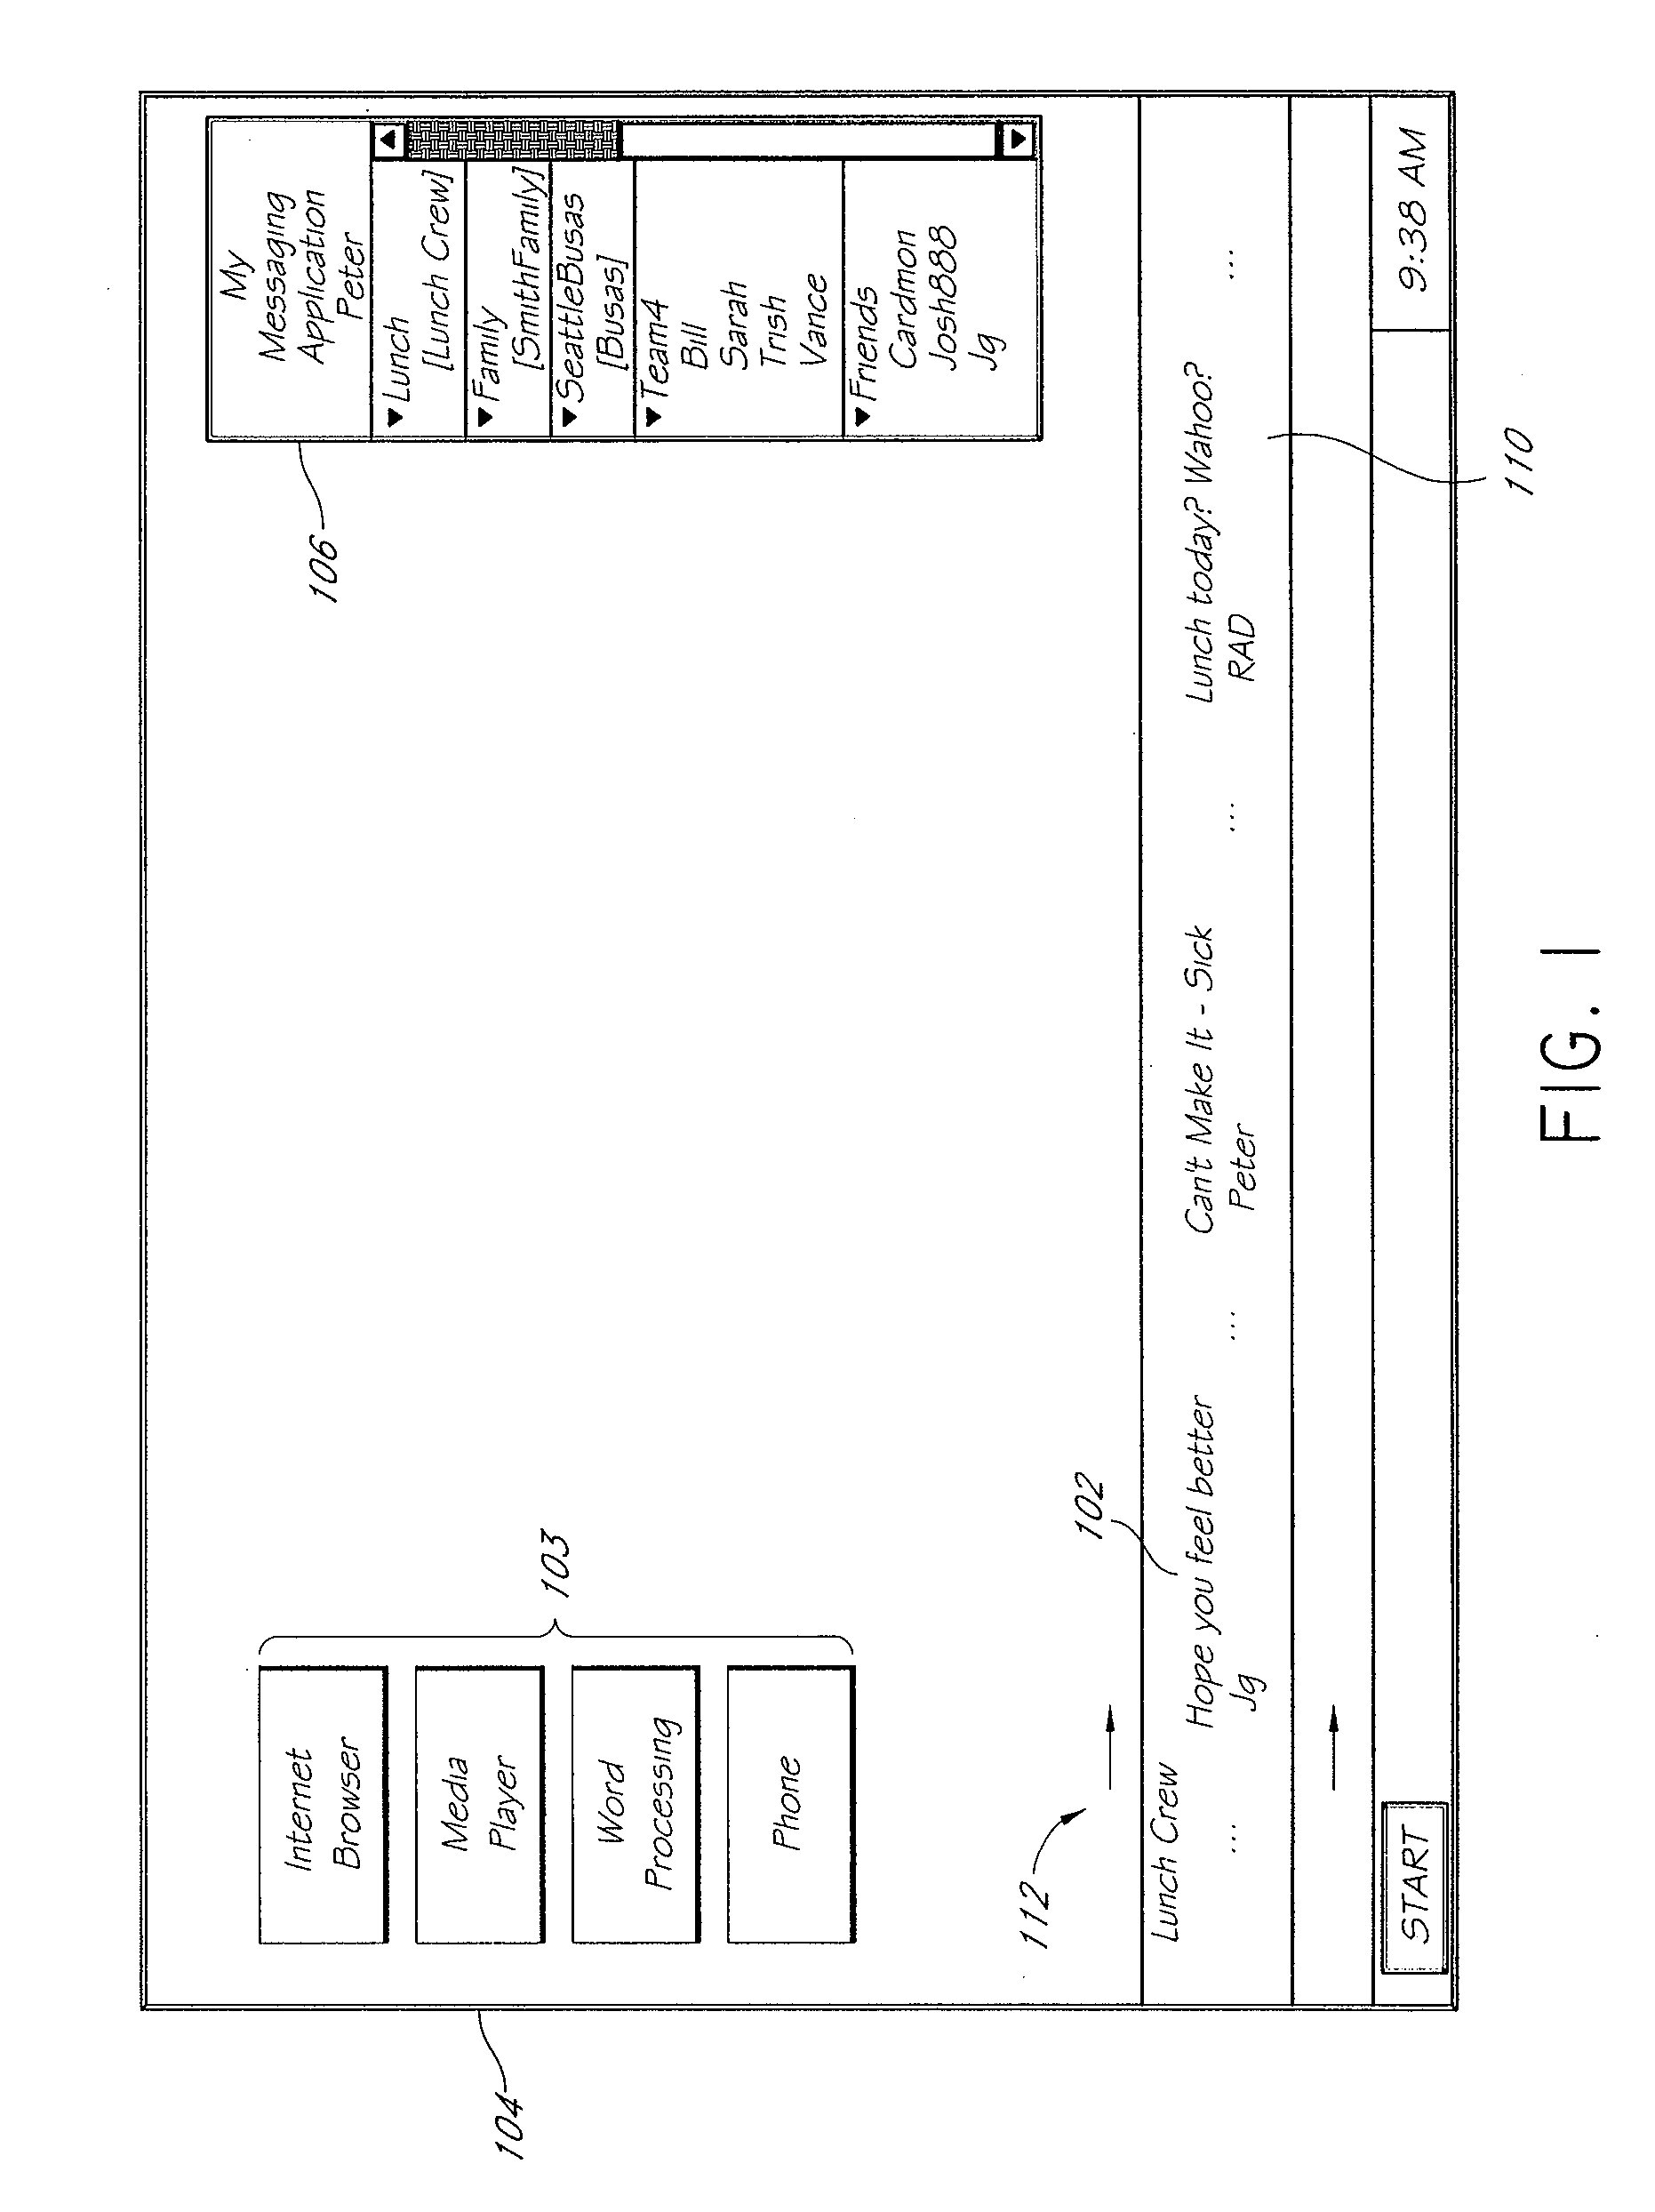 Systems and Methods for Multicast Communication